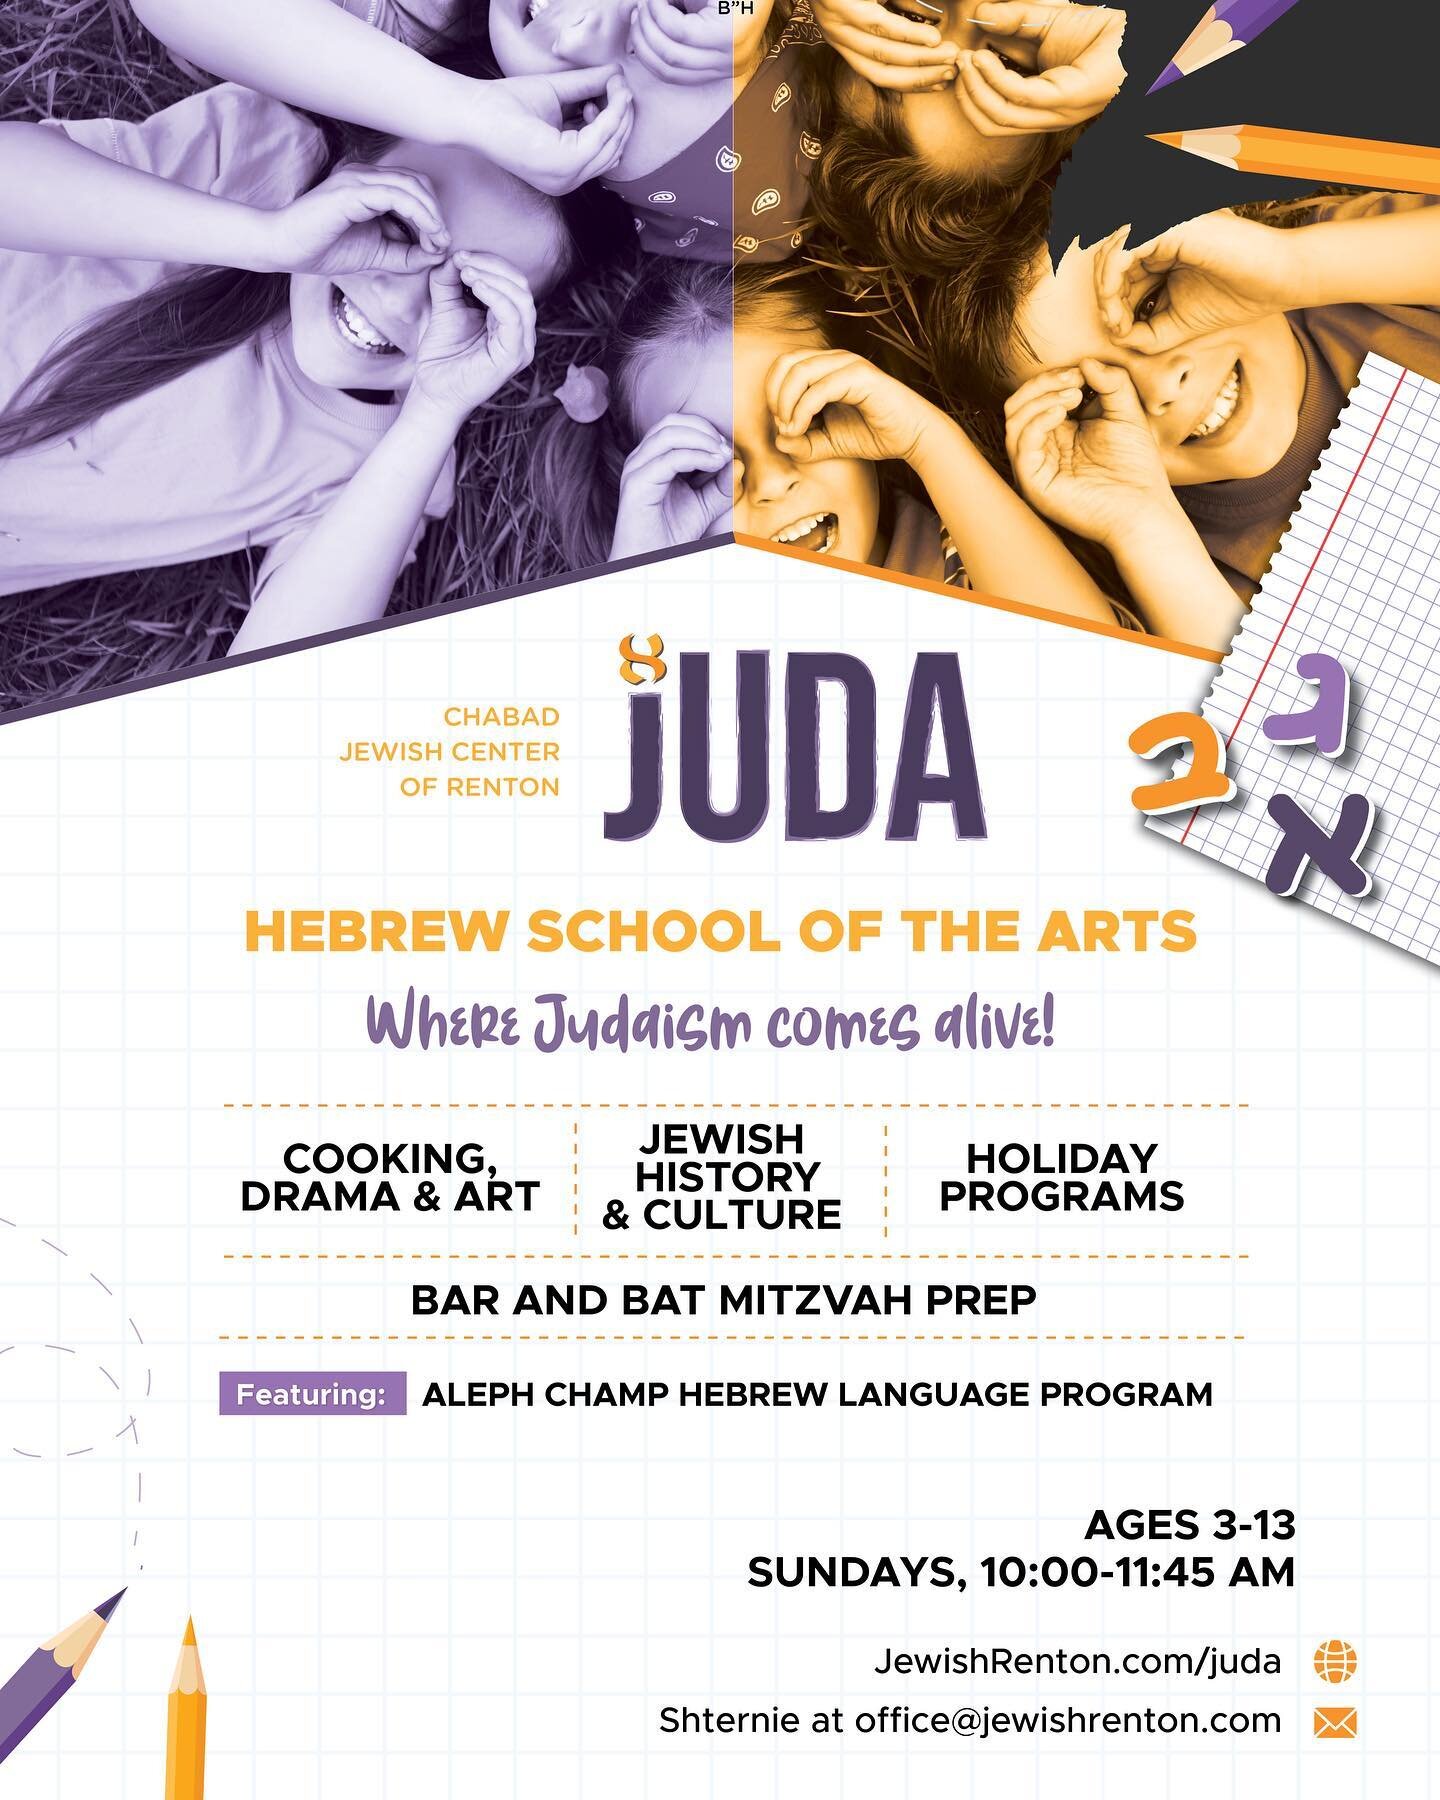 Give your child the gift of a lifetime!
Swiiiipe 👉 for full calendar of what&rsquo;s in store. 

Early bird ends July 31. JewishRenton.com/juda